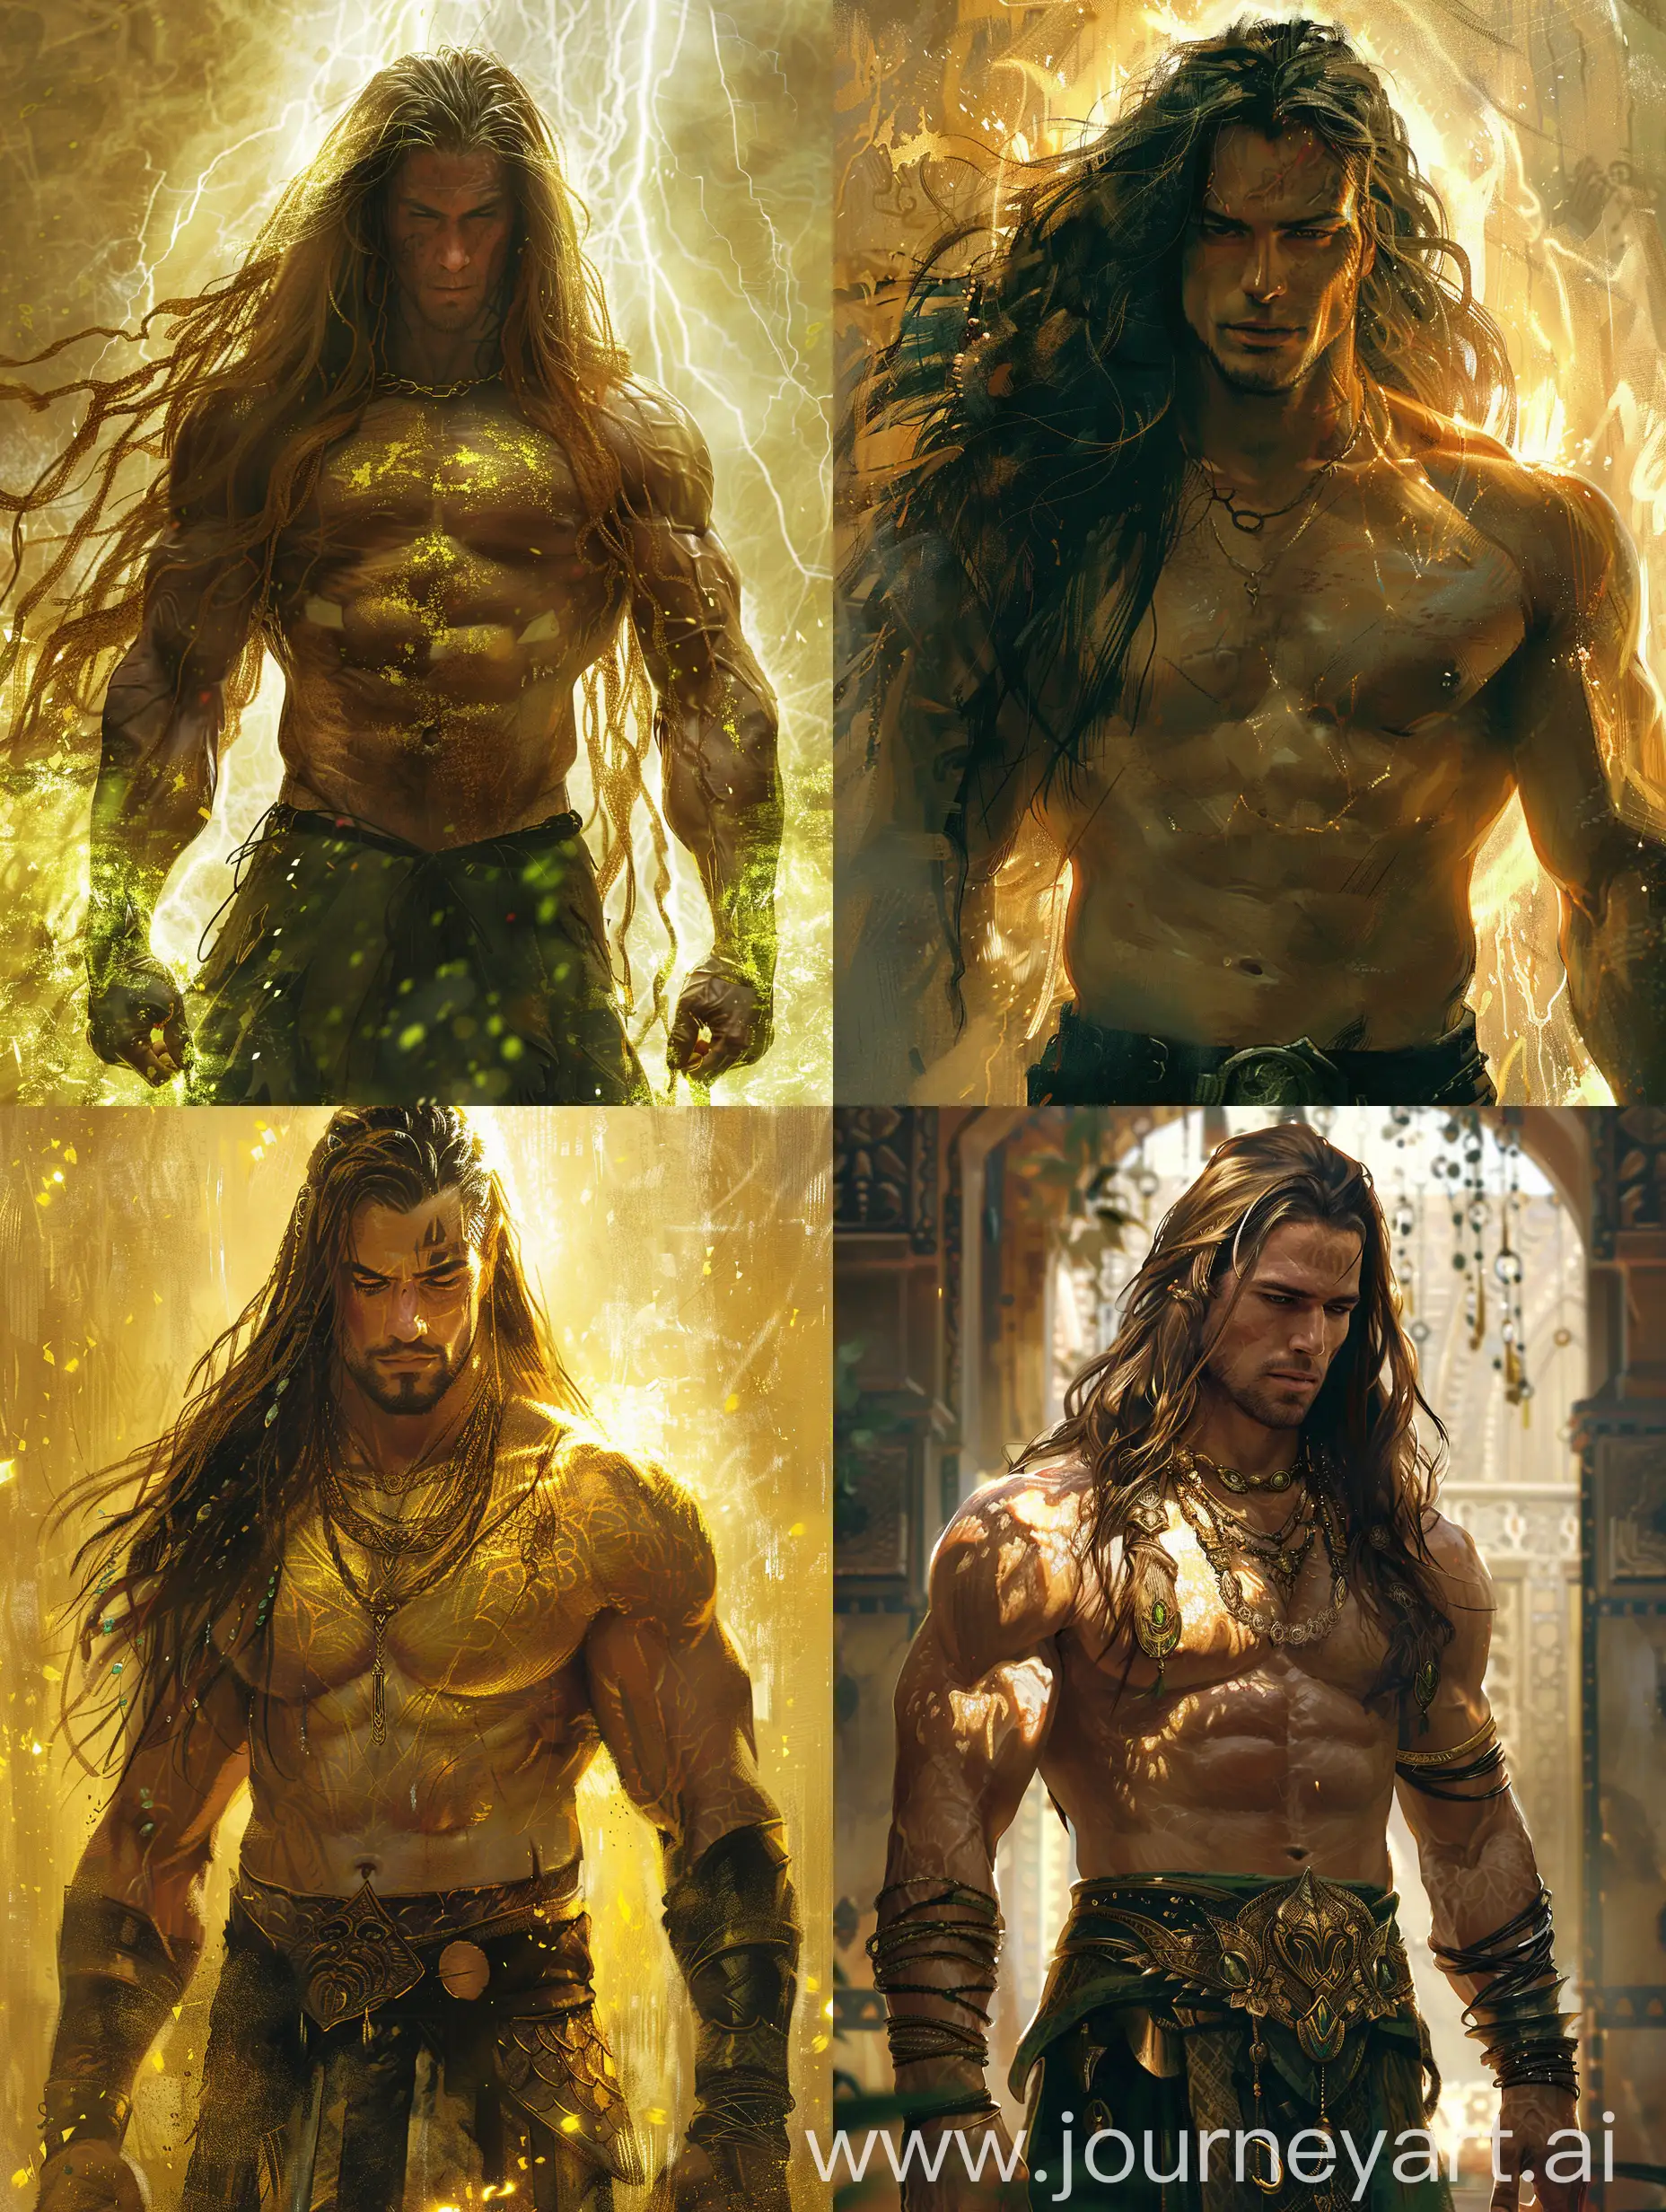 Subject: a god of gods; skin Purer than gold, long hair, muscular, emanates power that can rewrite infinities. 

Style/coloring: extremely realistic painted realism, detailed digital painting concept art, detailed paiting by gaston bussiere, craig mullins A mystical, dreamlike portrait in a cinematic style, Ed Emsh, Virgil Finlay, Norman Saunders, Hubert Rogers, Earle Bergey, Kelly Freas --upbeta --s 250